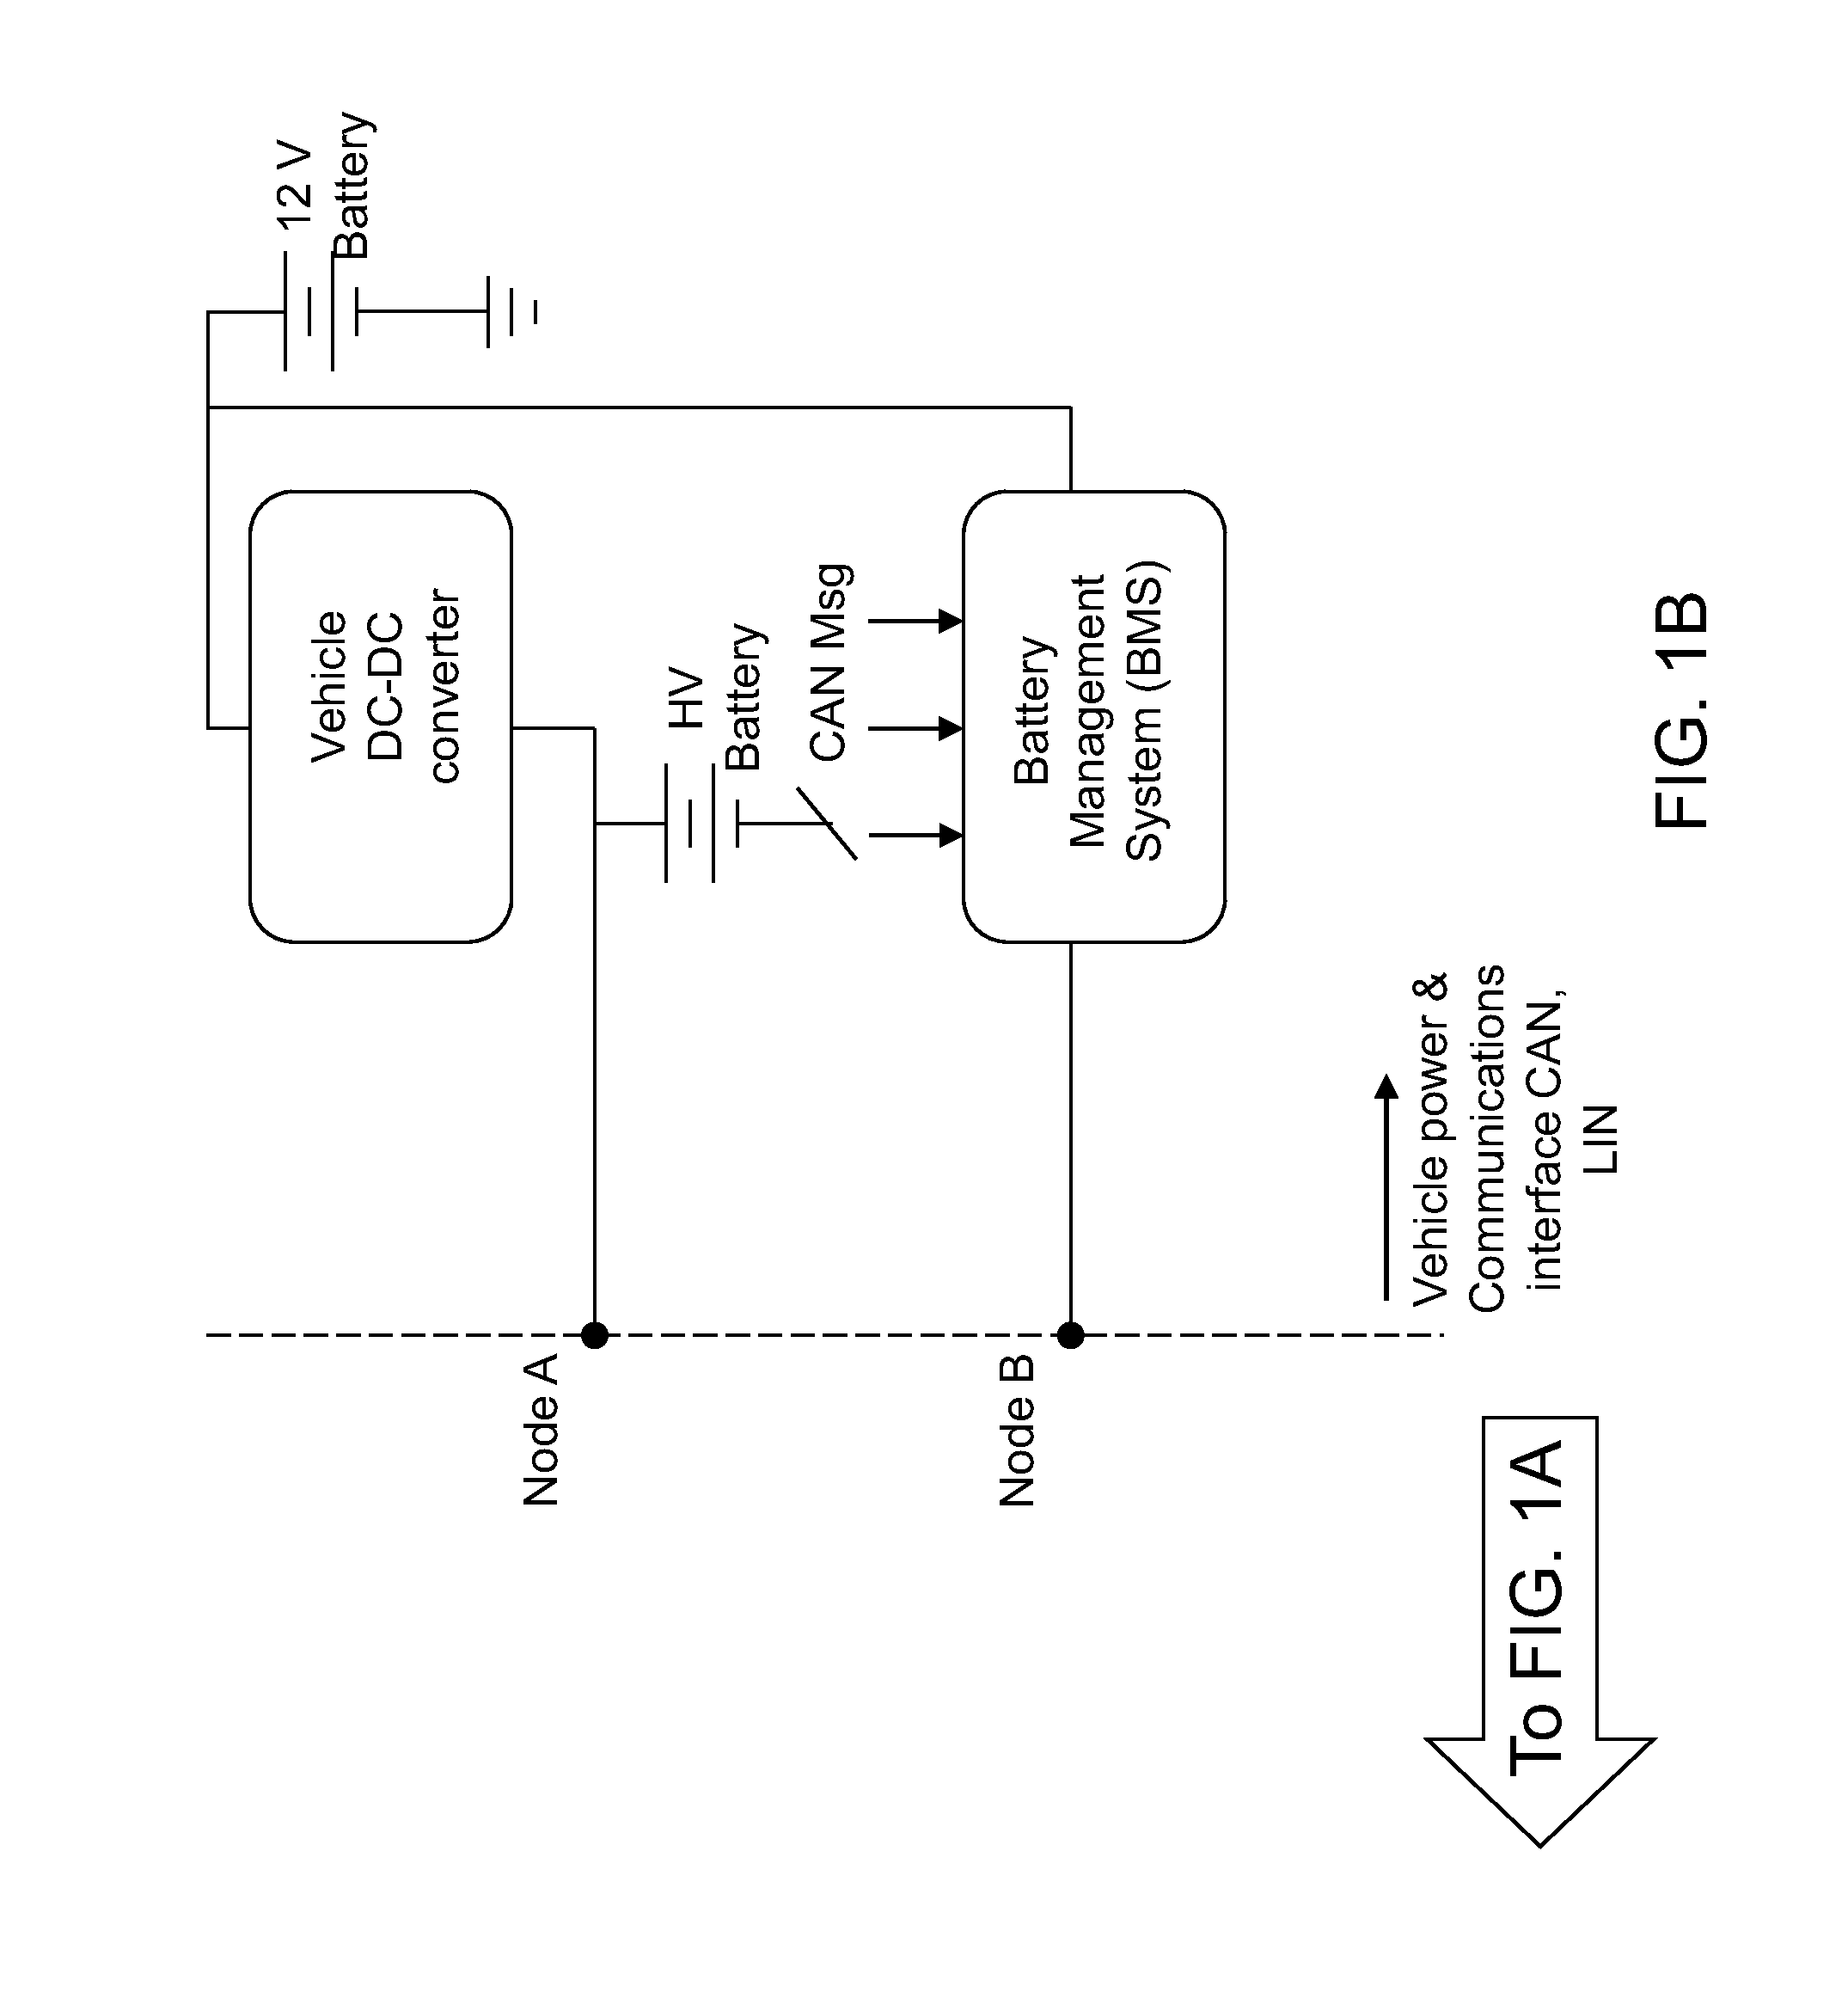 Wireless power transfer electric vehicle supply equipment installation and validation tool